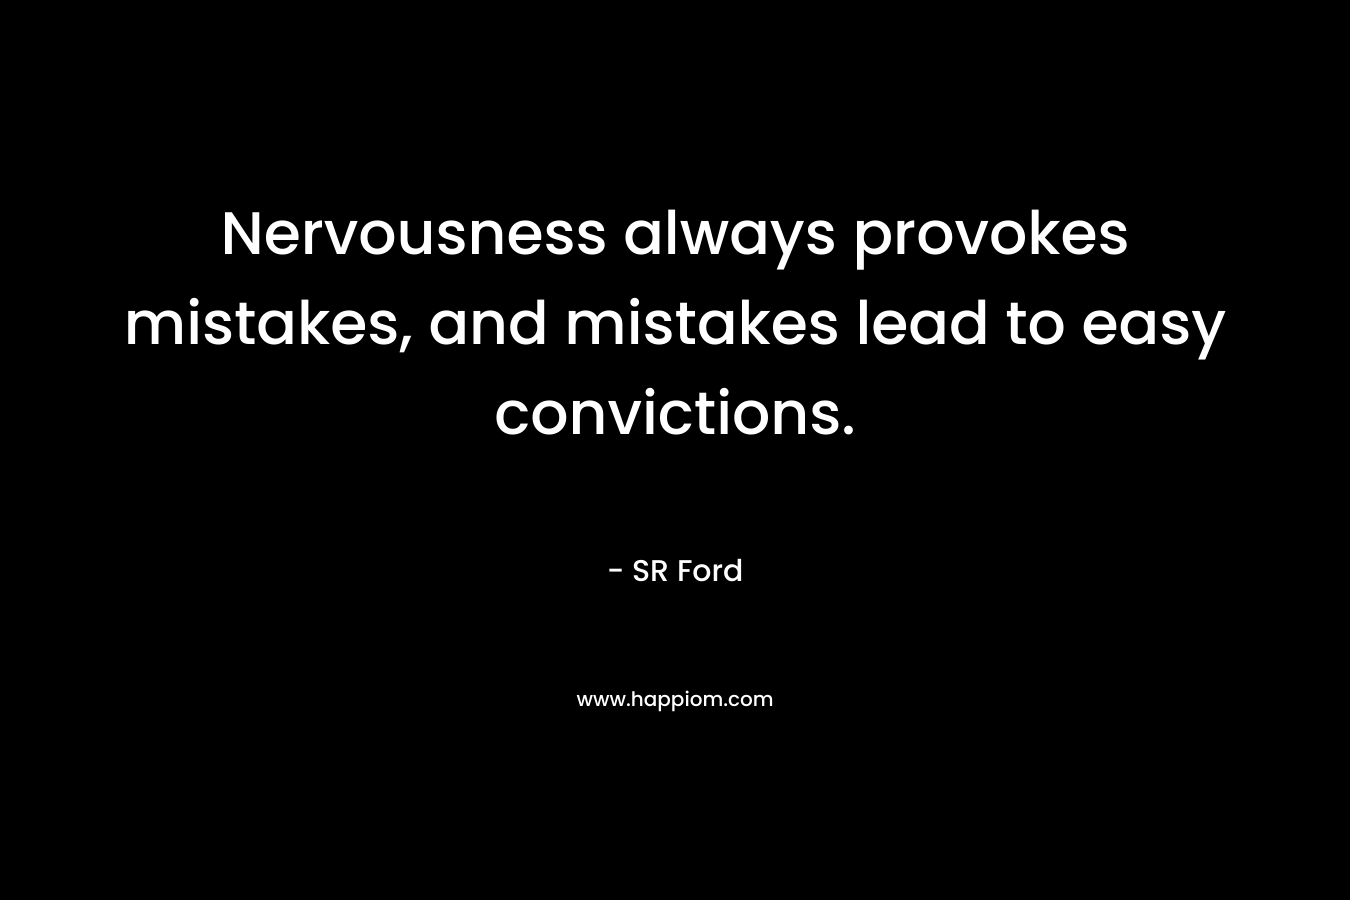 Nervousness always provokes mistakes, and mistakes lead to easy convictions.